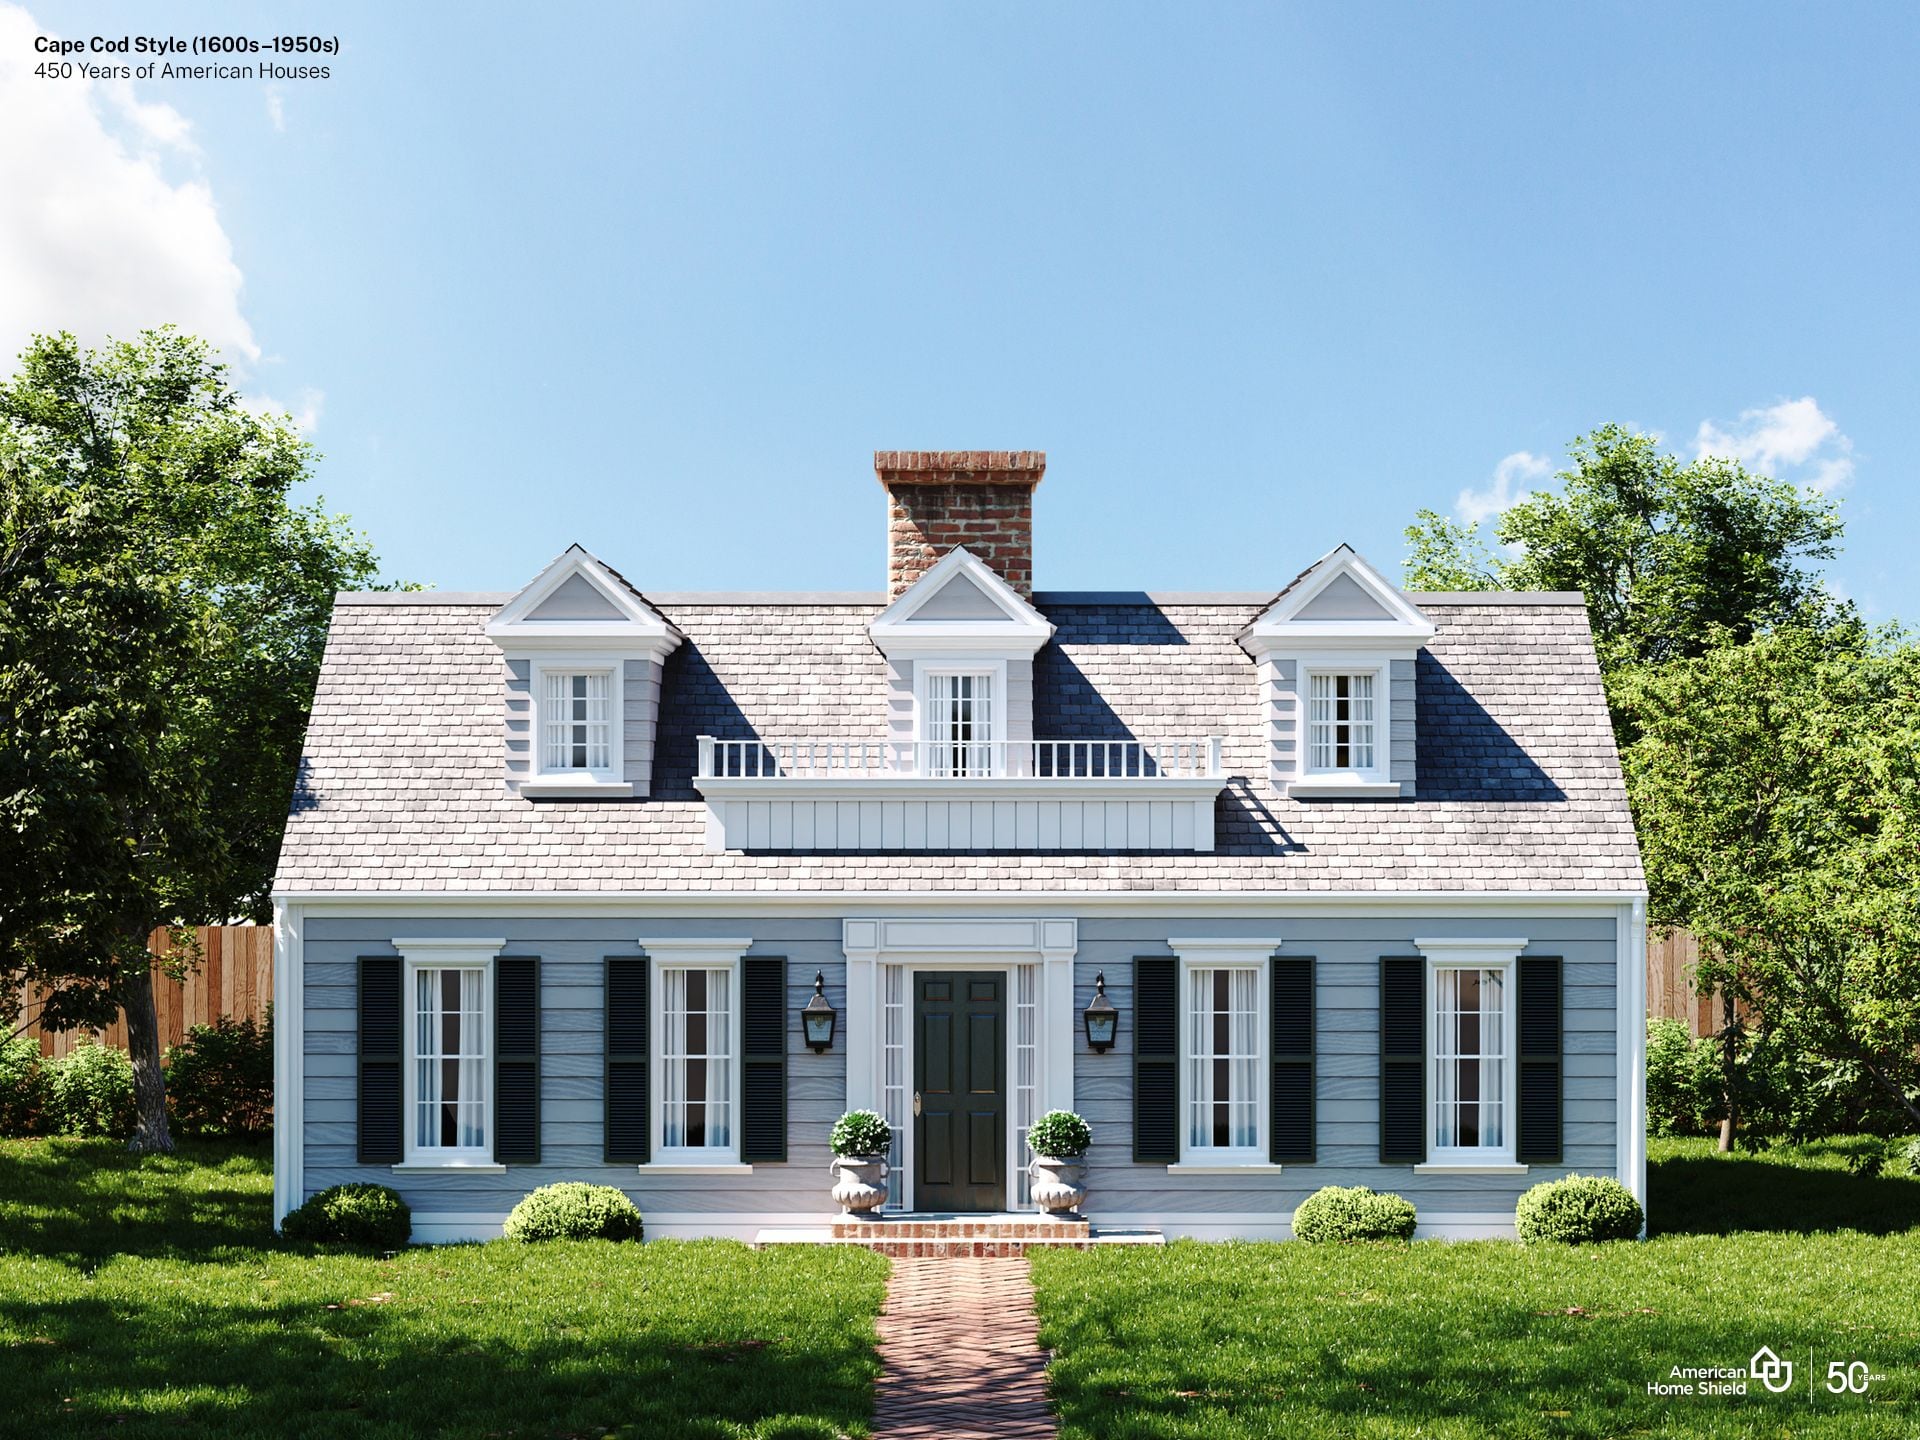 American Home Shield's re-creation of a Cape Cod-style home, popular from the 1600s to the 1950s.